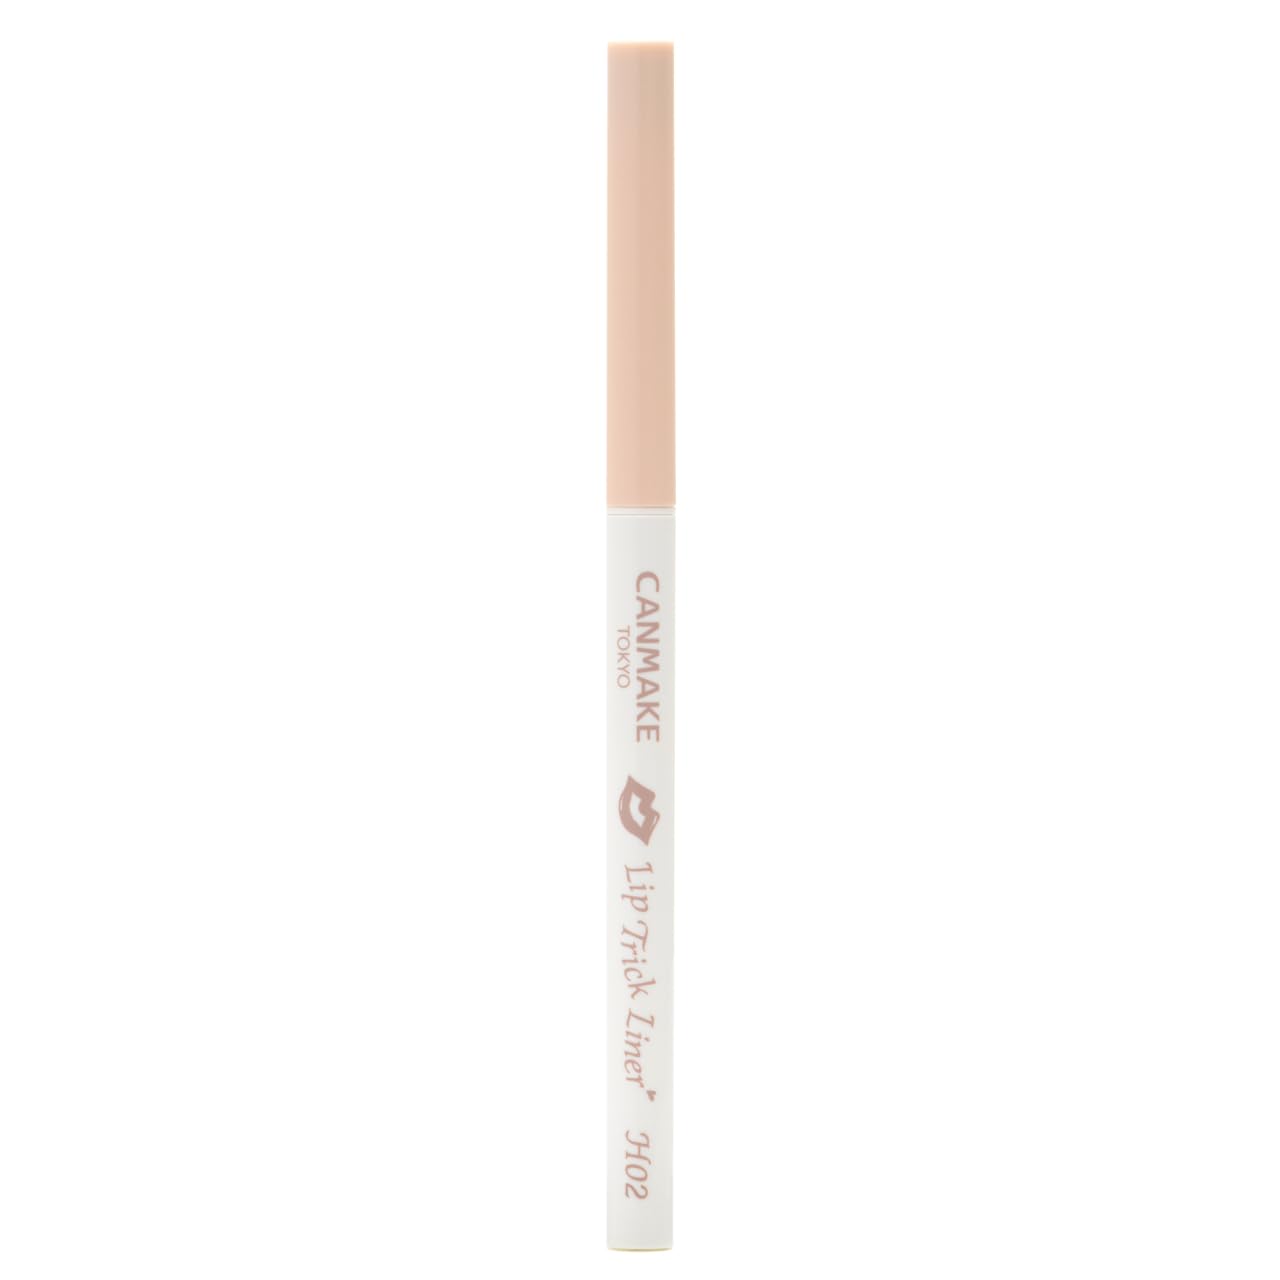 Canmake Lip Trick Liner Natural Beige 1.5mm Retractable Highlight Lip Pencil H02